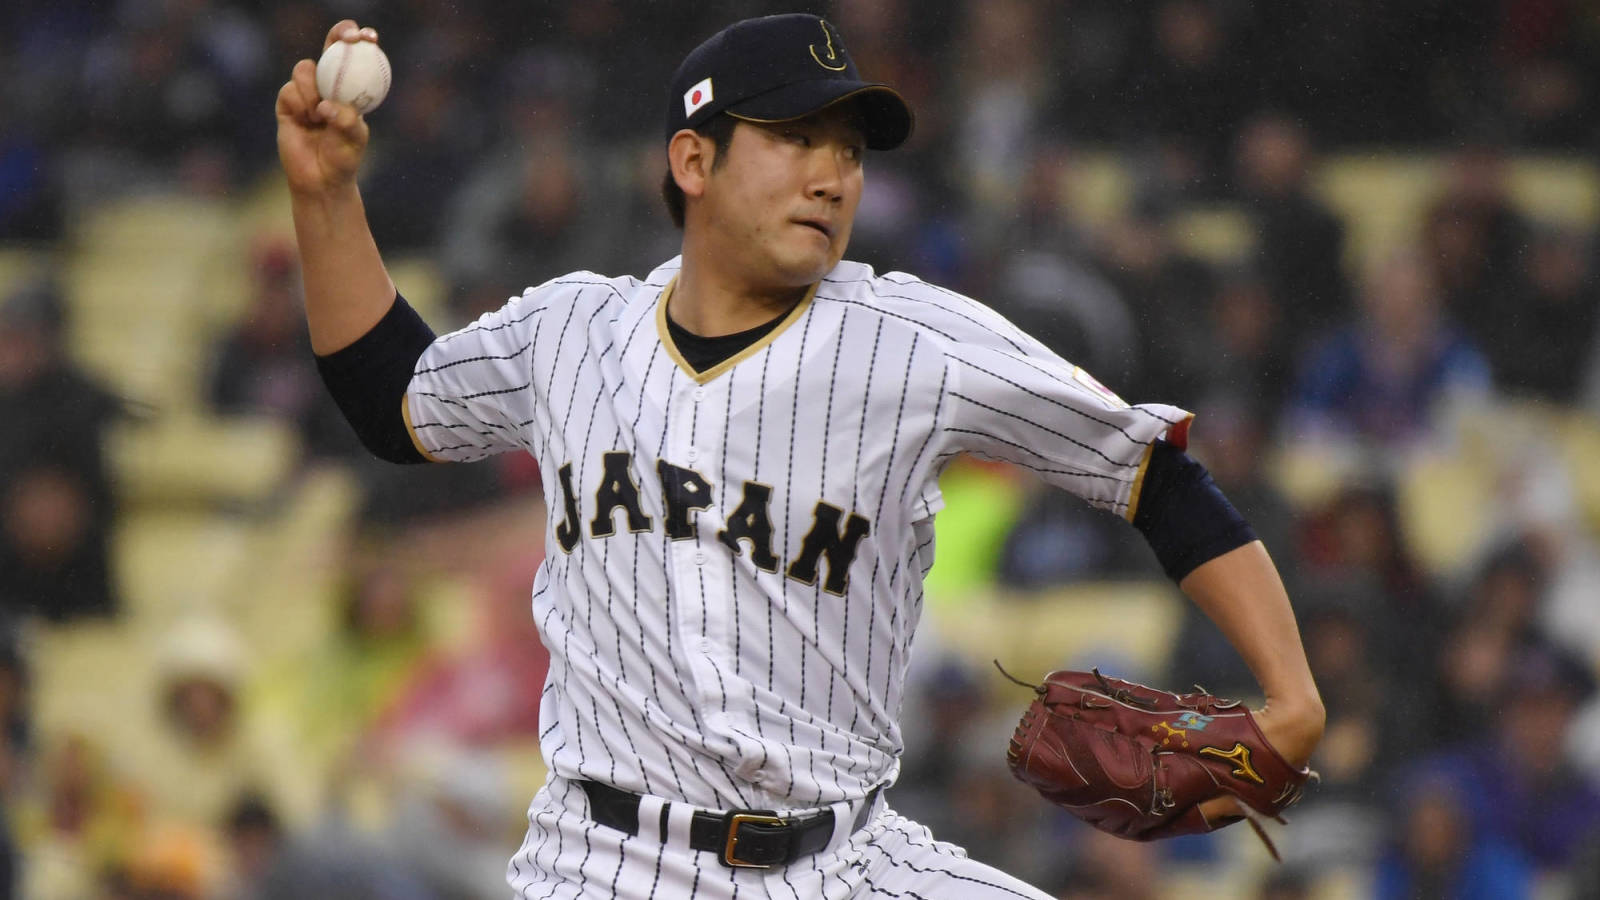 Tomoyuki Sugano returning to Japan after being unable to find MLB deal